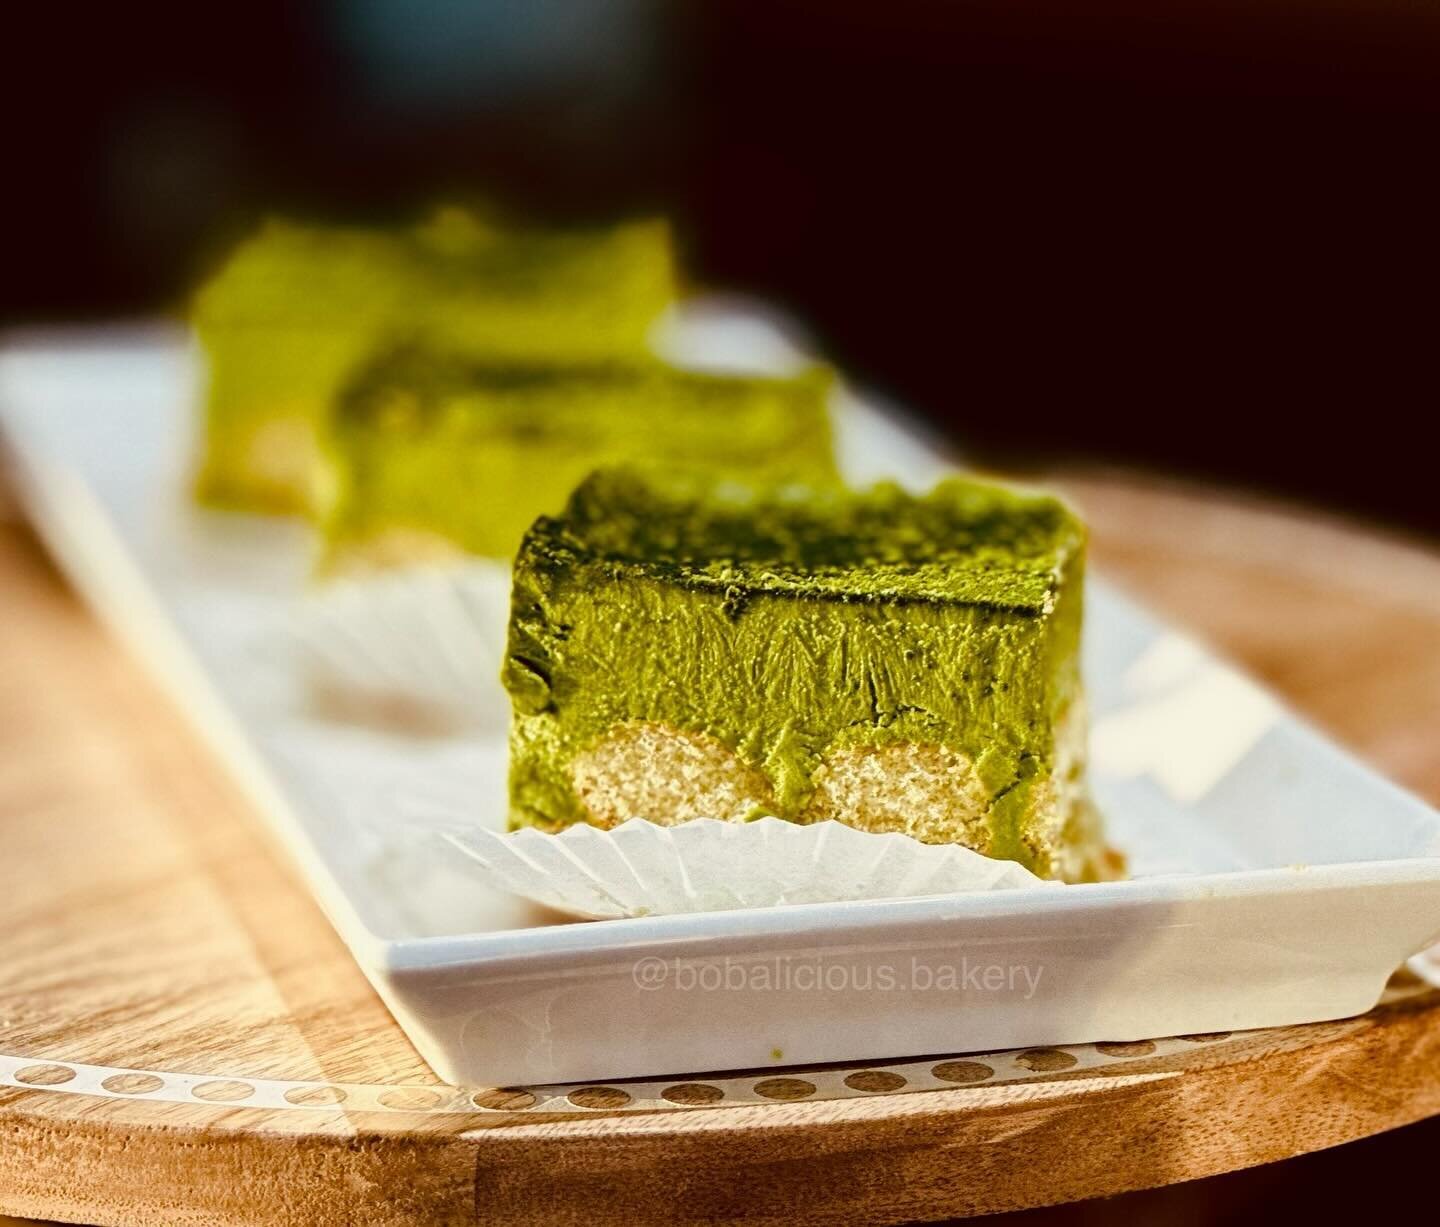 Our matcha tiramisu is a must-try. 💚 It&rsquo;s a classic with a fun twist. 

📍 2926 S Campbell Ave Springfield, MO 65807
⏰ Mon-Sat: 11a-8p, Sunday: 11a-6p